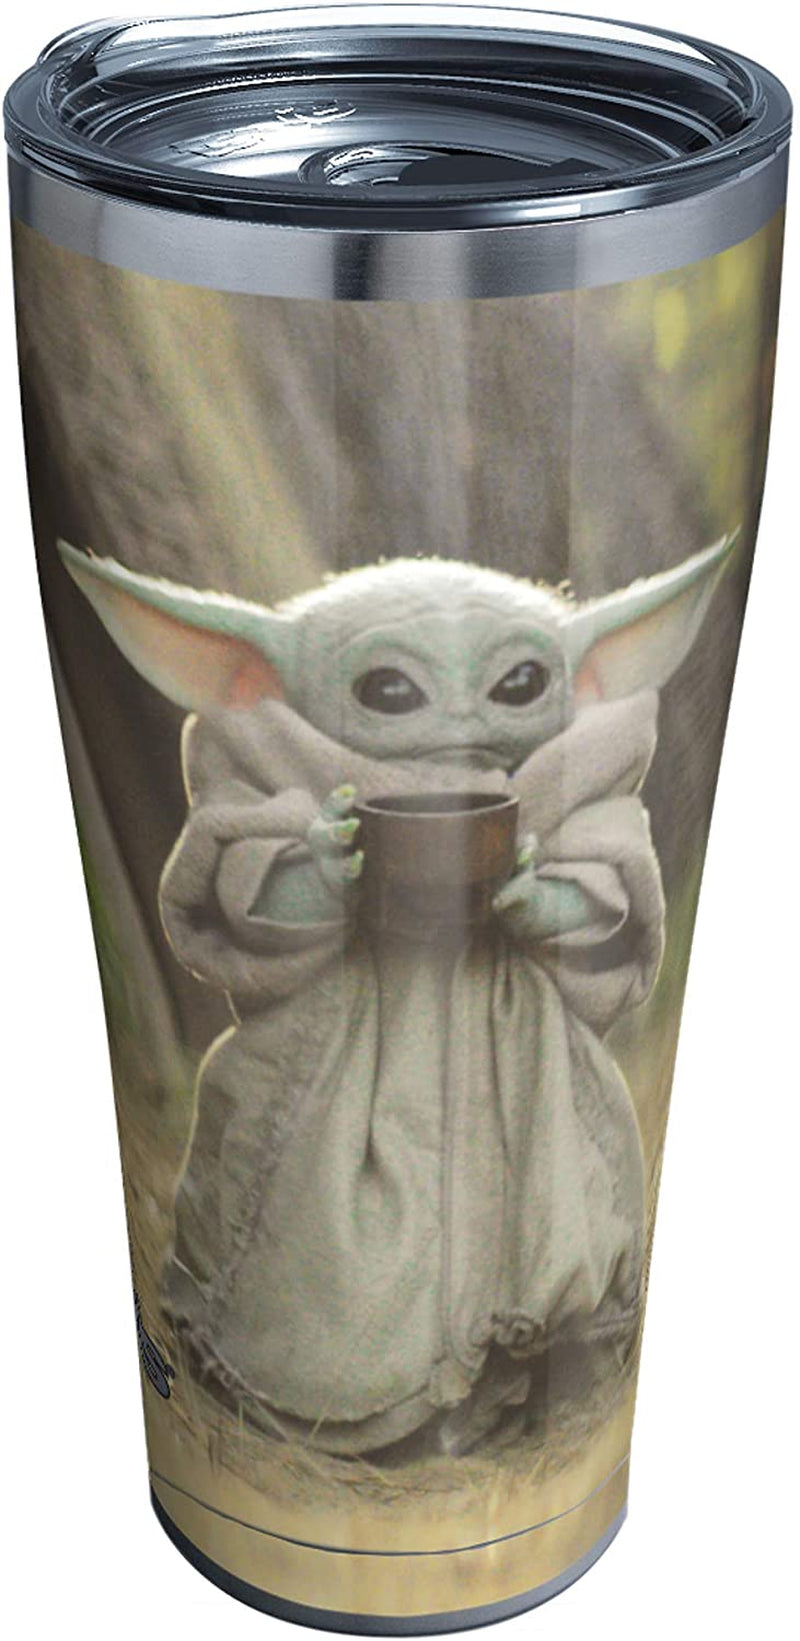 Tervis Made in USA Double Walled Star Wars - the Mandalorian Child Sipping Insulated Tumbler Cup Keeps Drinks Cold & Hot, 16Oz, Clear Home & Garden > Kitchen & Dining > Tableware > Drinkware Tervis Stainless Steel Contemporary 